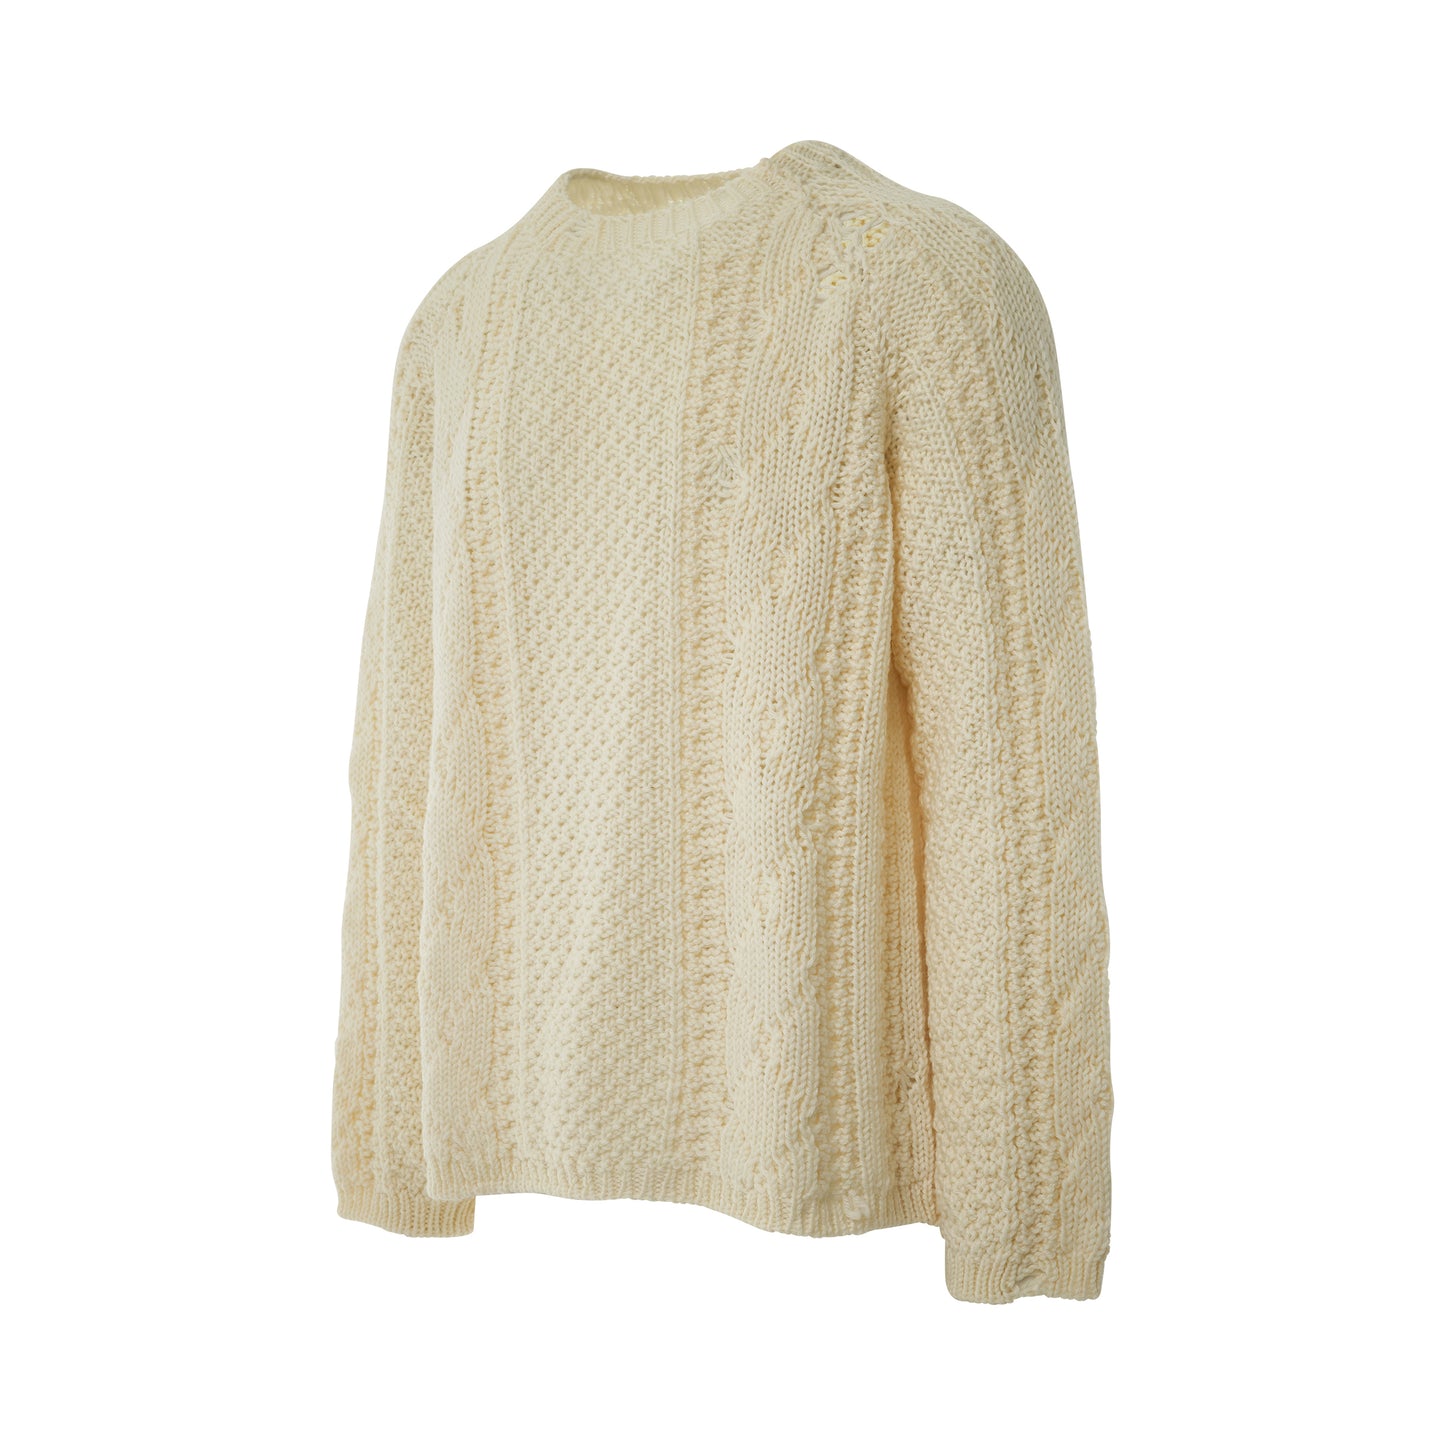 Distressed Panel Knit Sweater in Off White